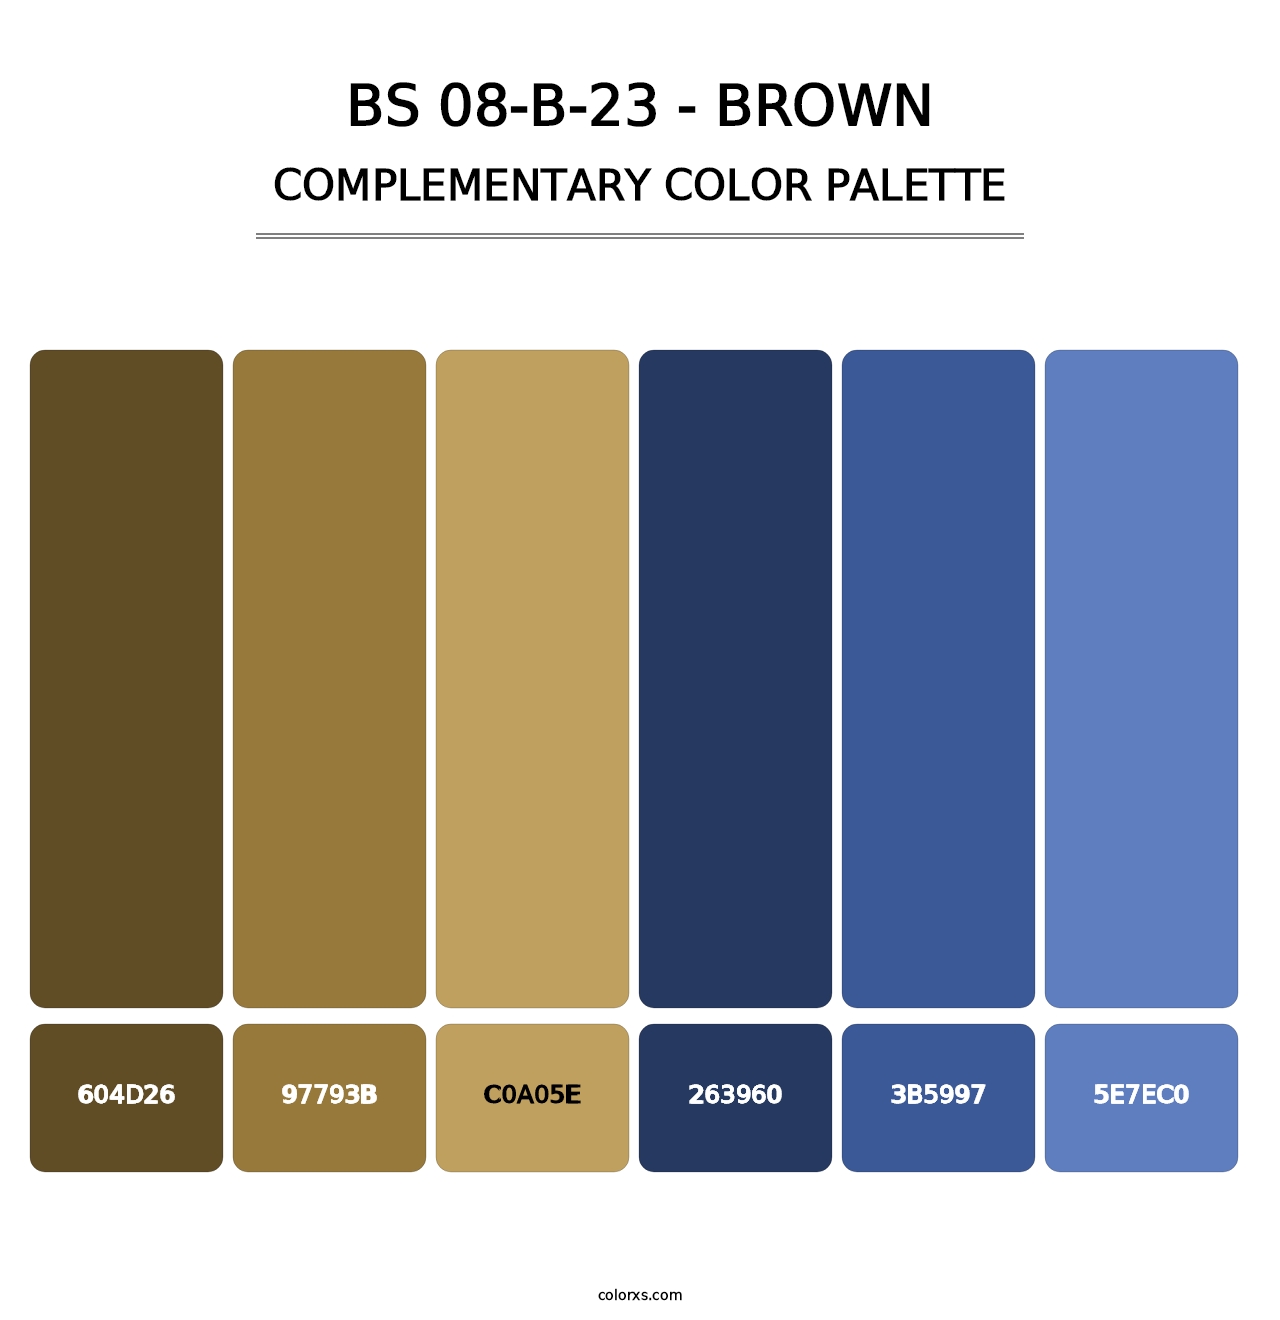 BS 08-B-23 - Brown - Complementary Color Palette